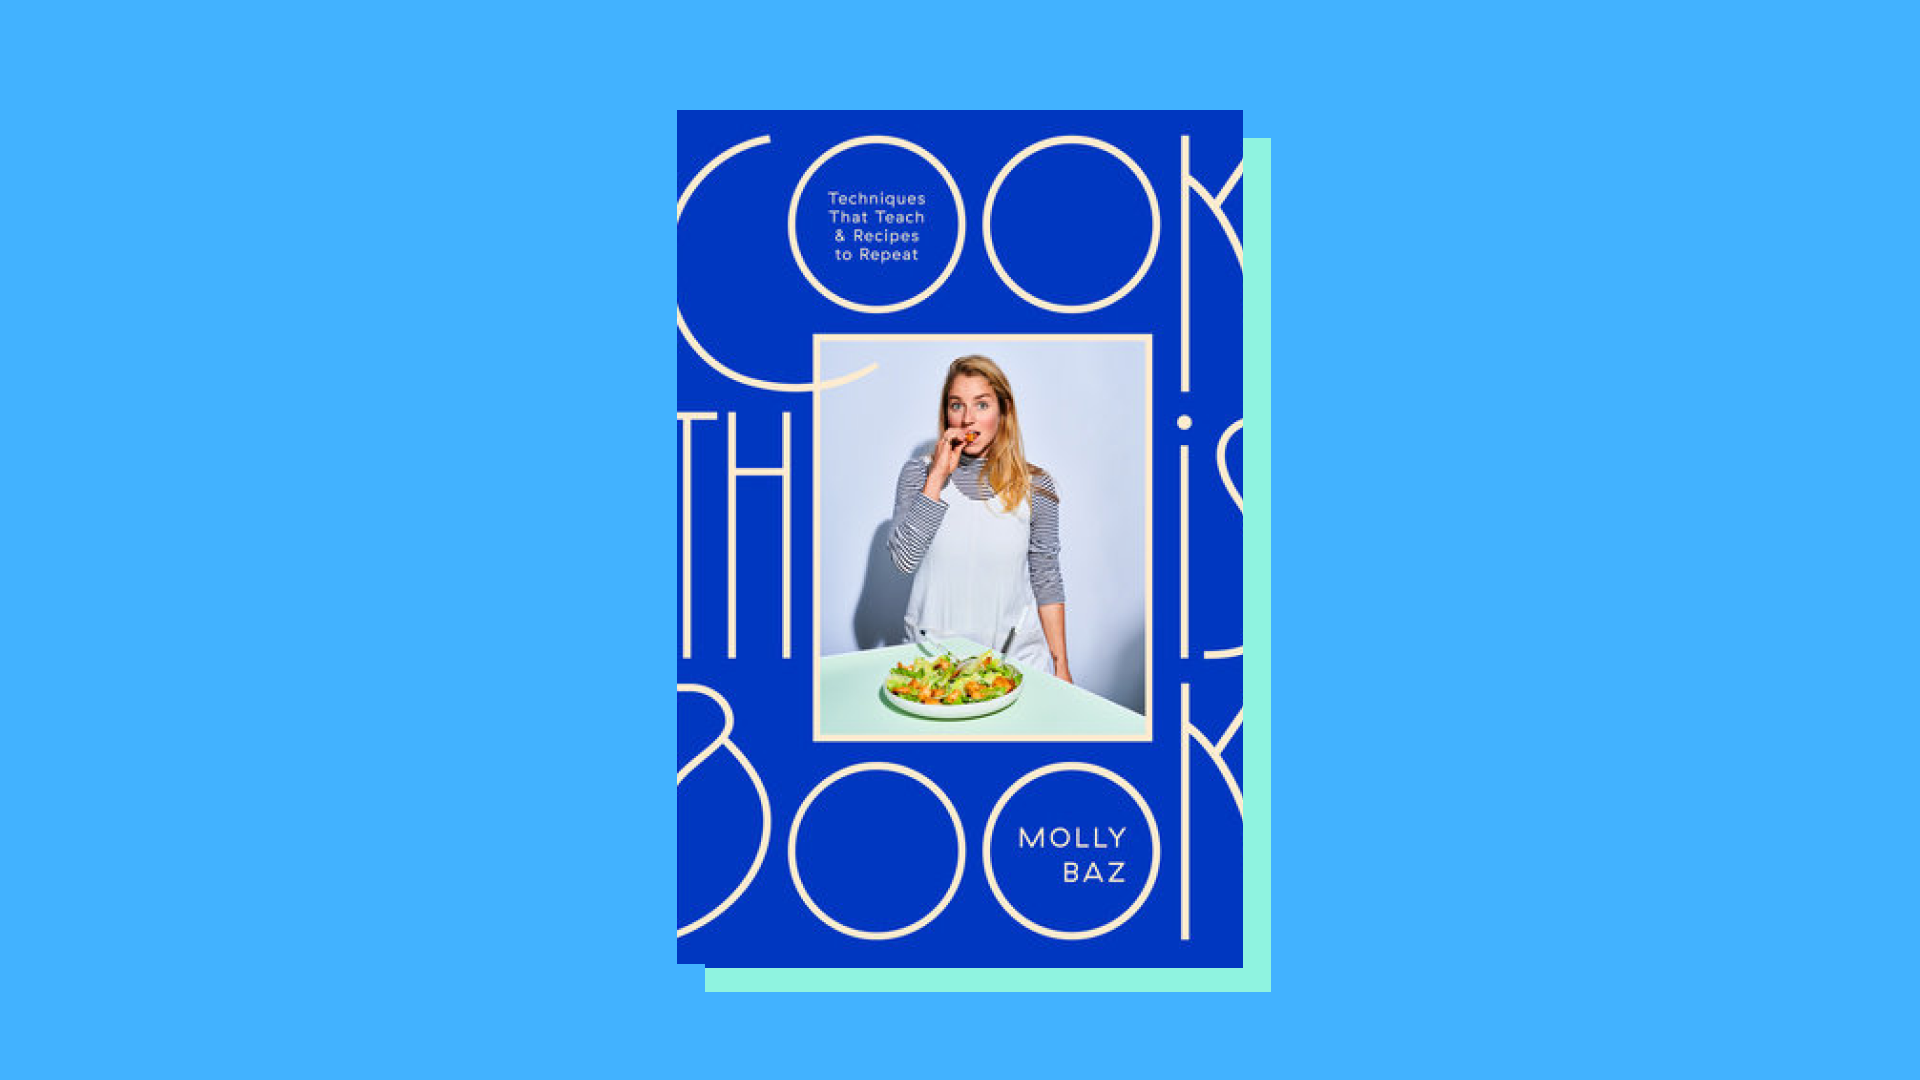 “Cook This Book: Techniques That Teach and Recipes to Repeat” by Molly Baz